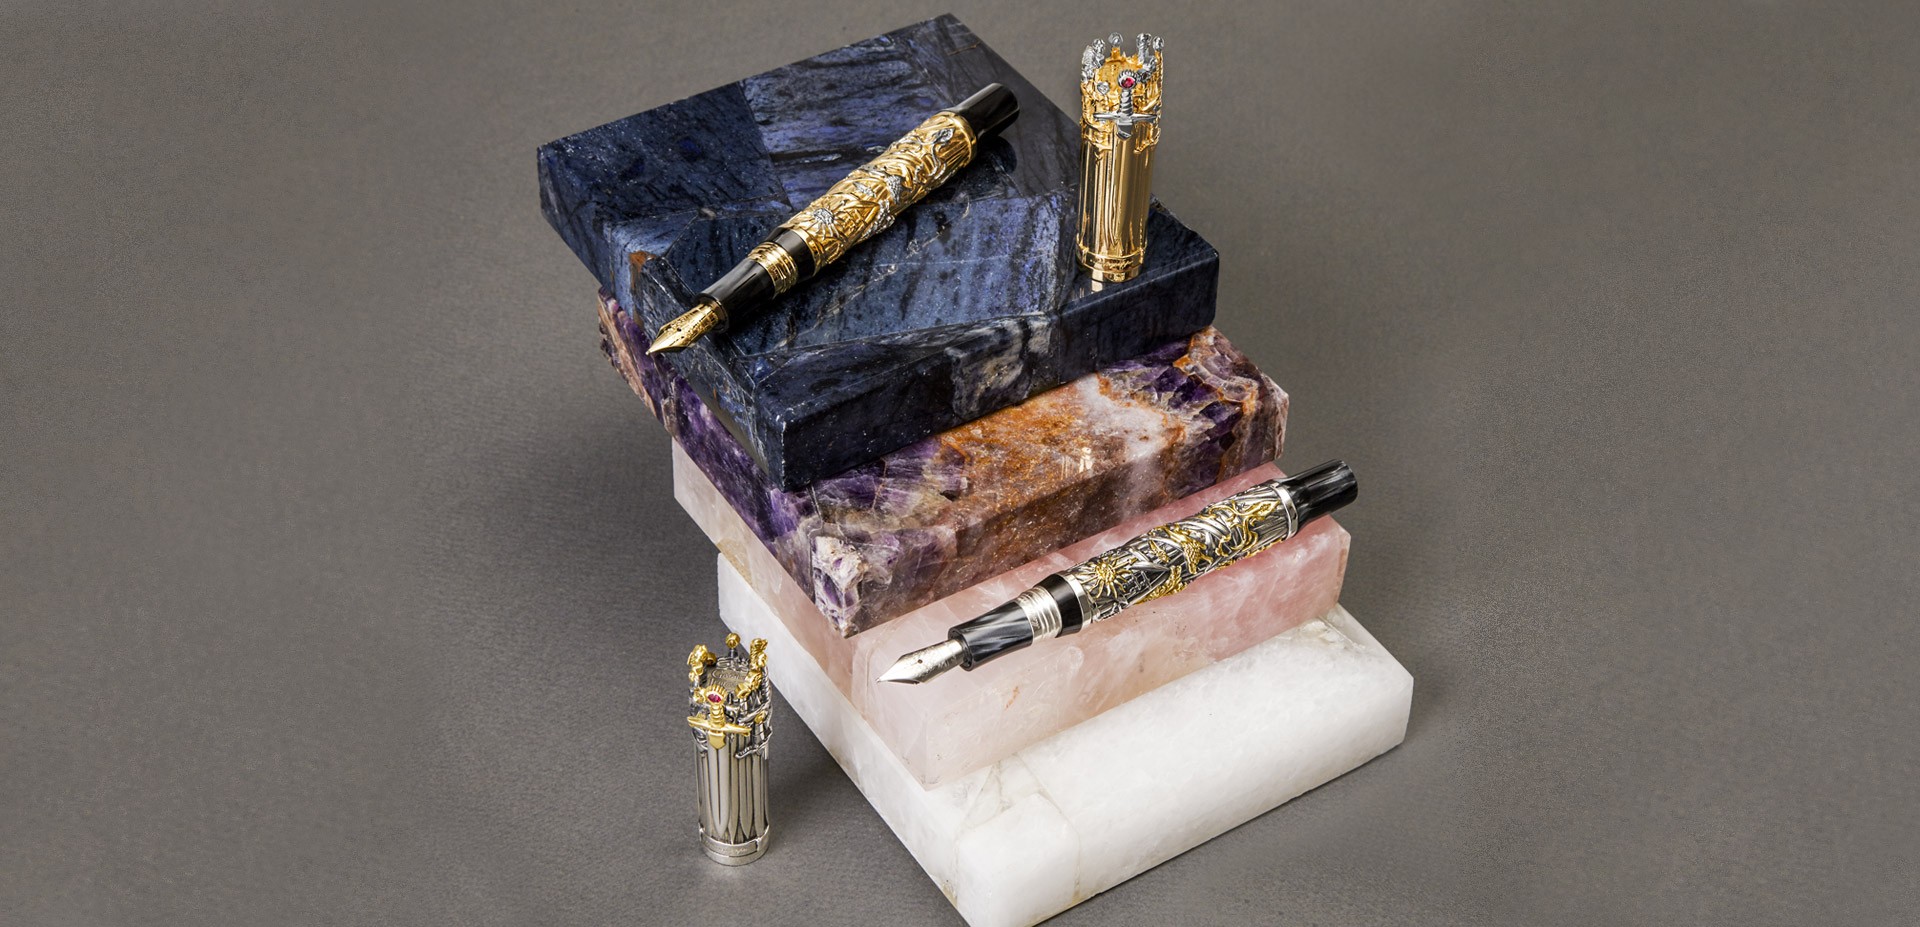 Game of Thrones Montegrappa pens